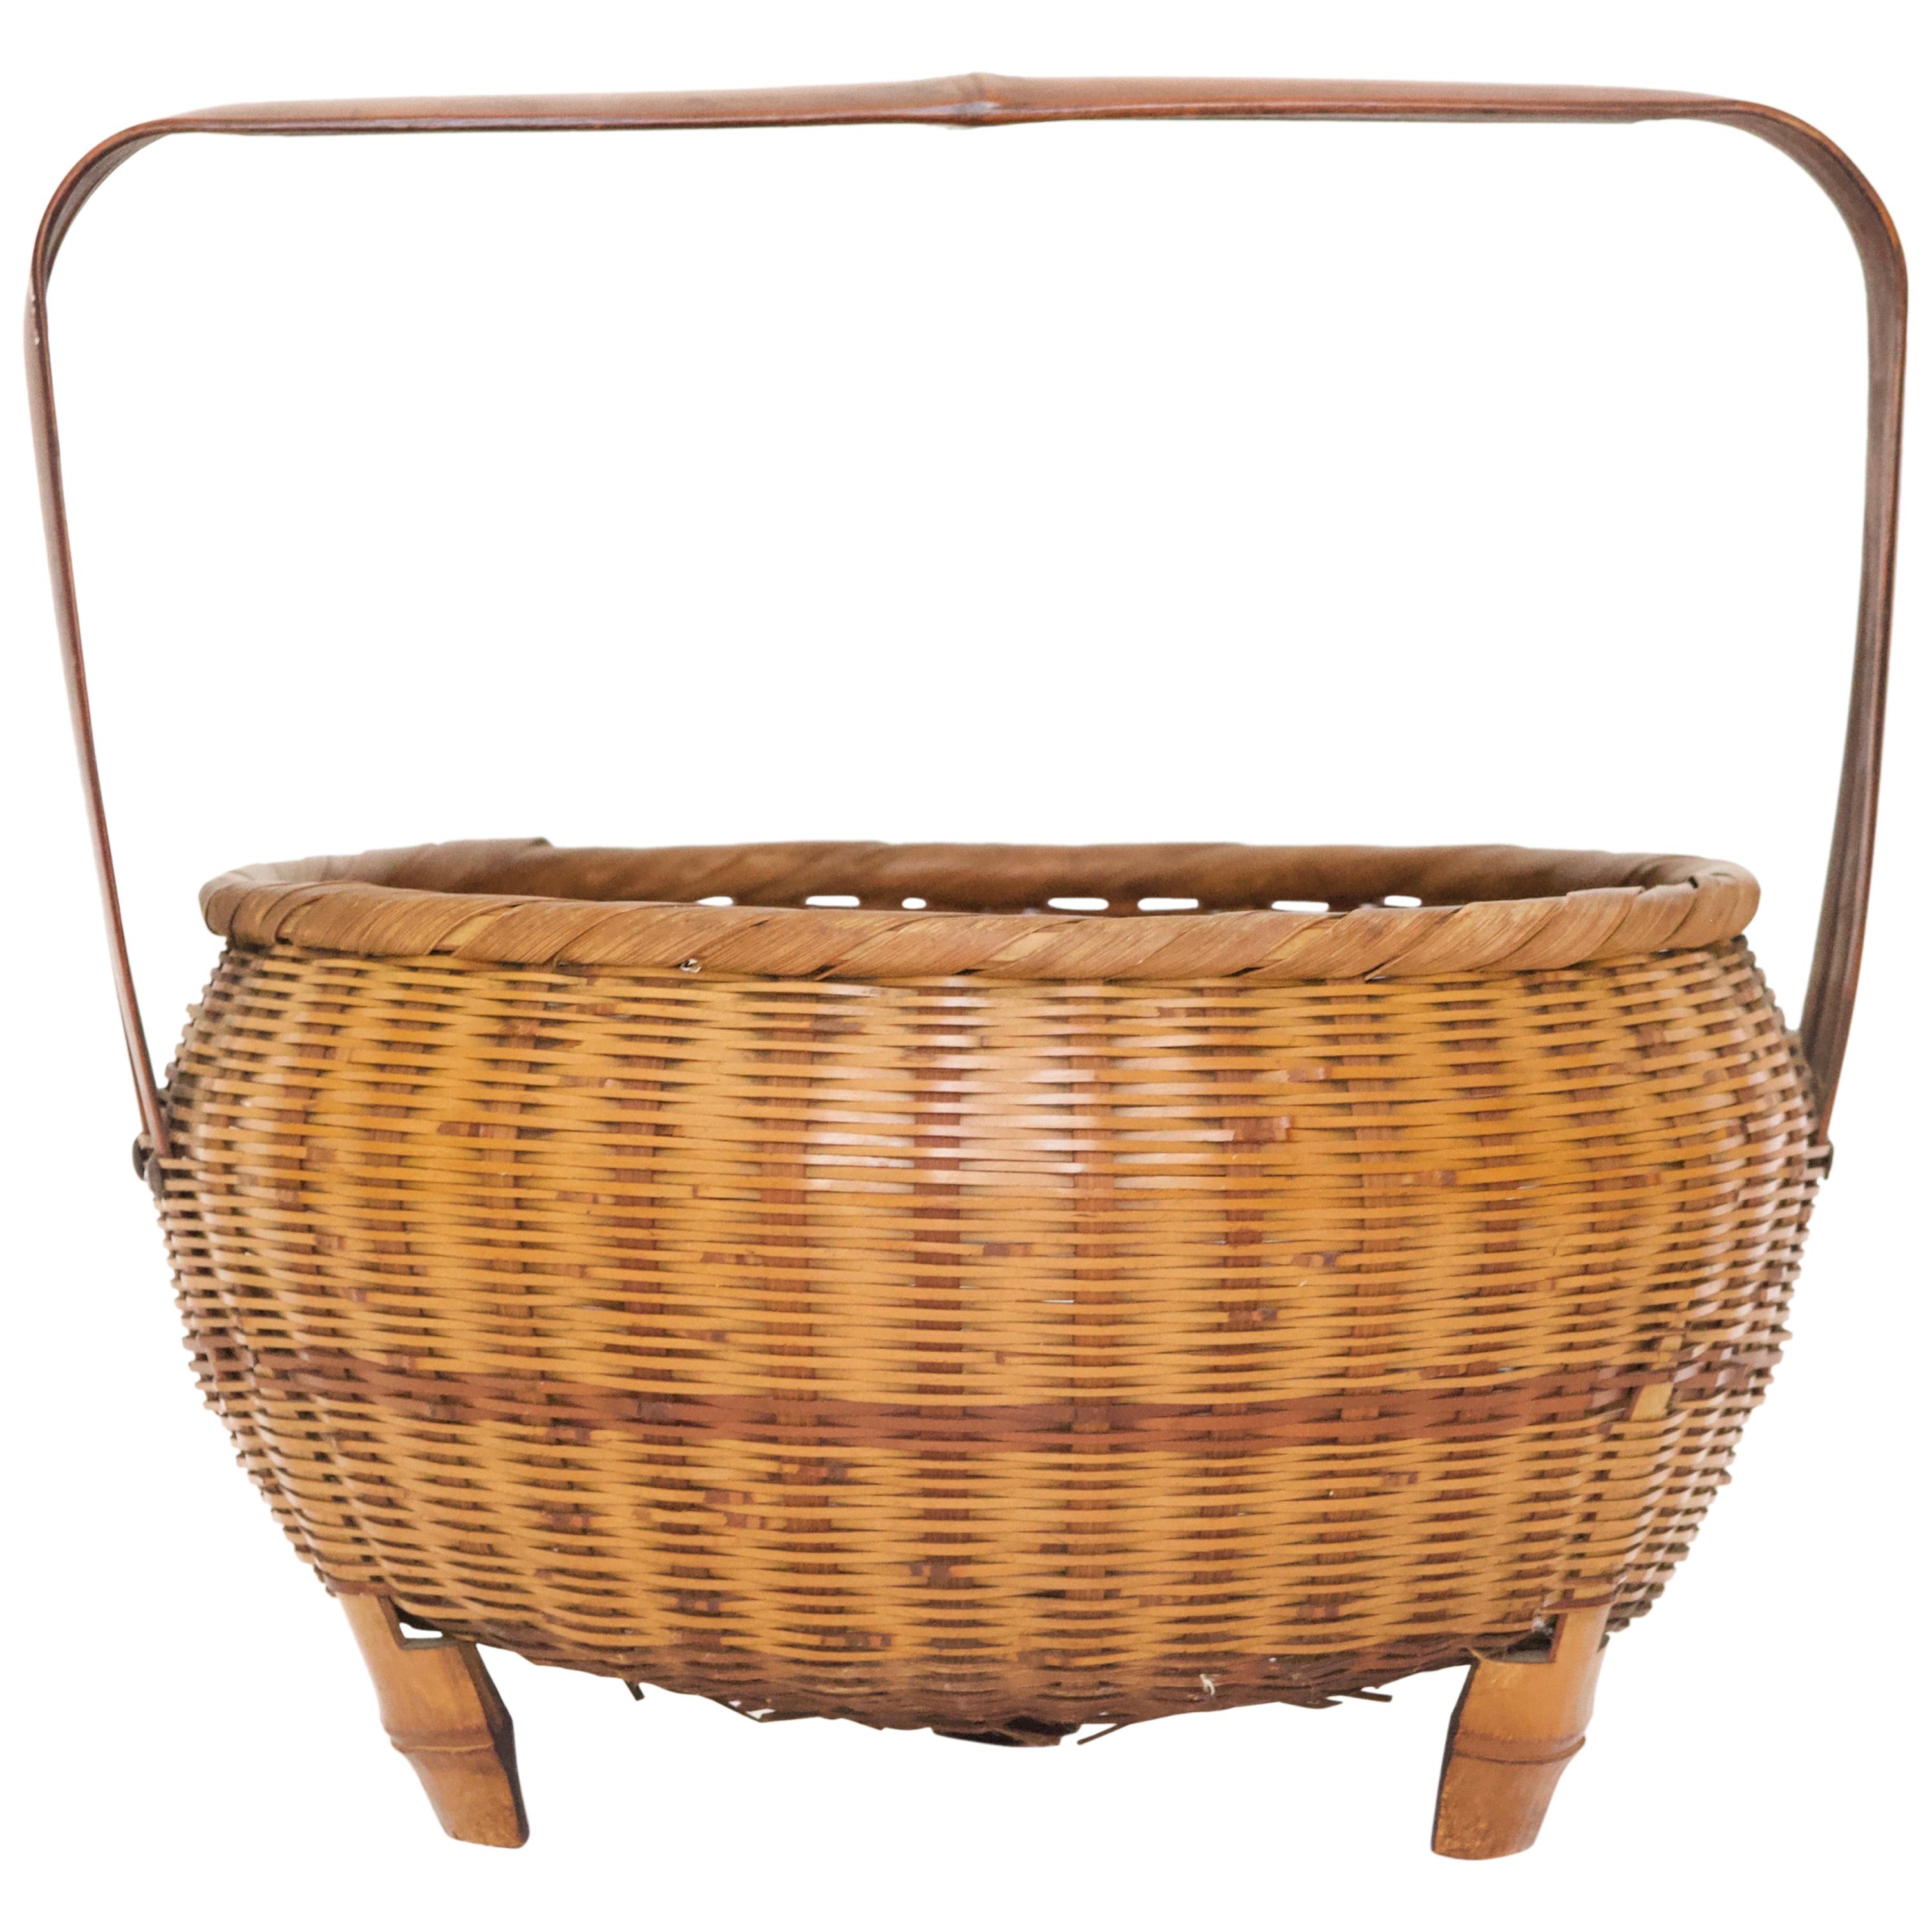 Japanese Woven Basket For Sale